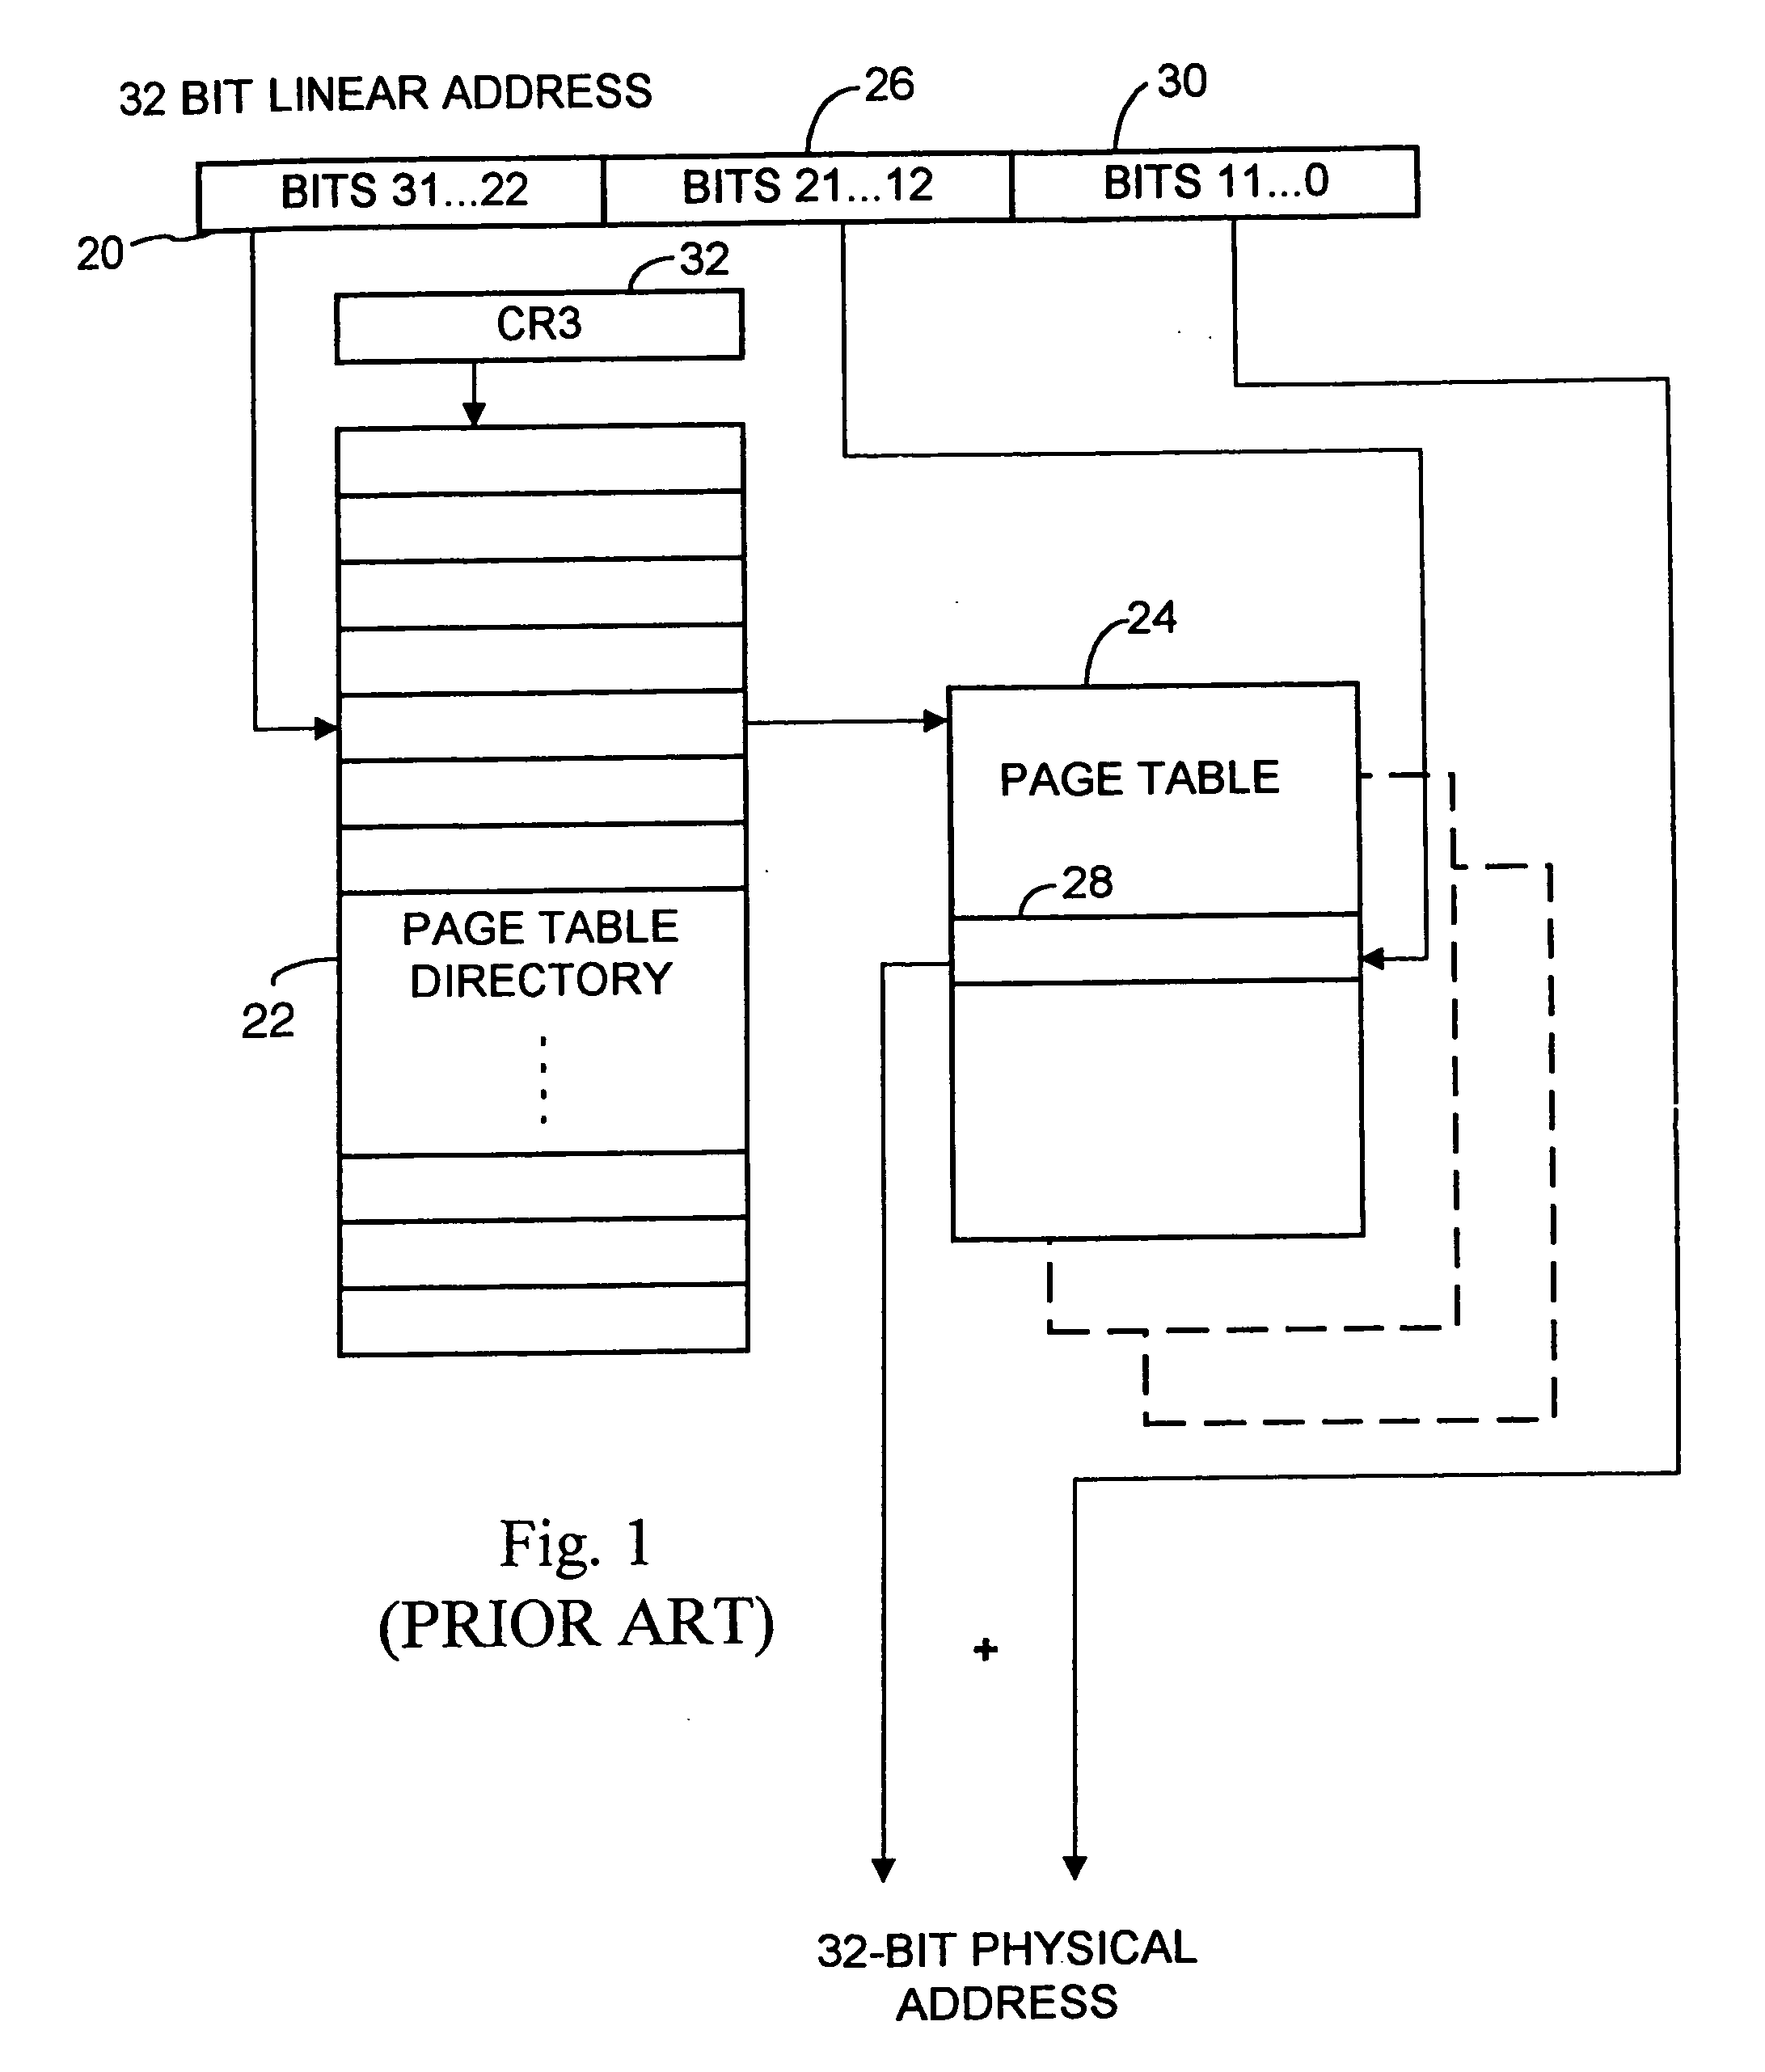 Application programming interface enabling application programs to group code and data to control allocation of physical memory in a virtual memory system